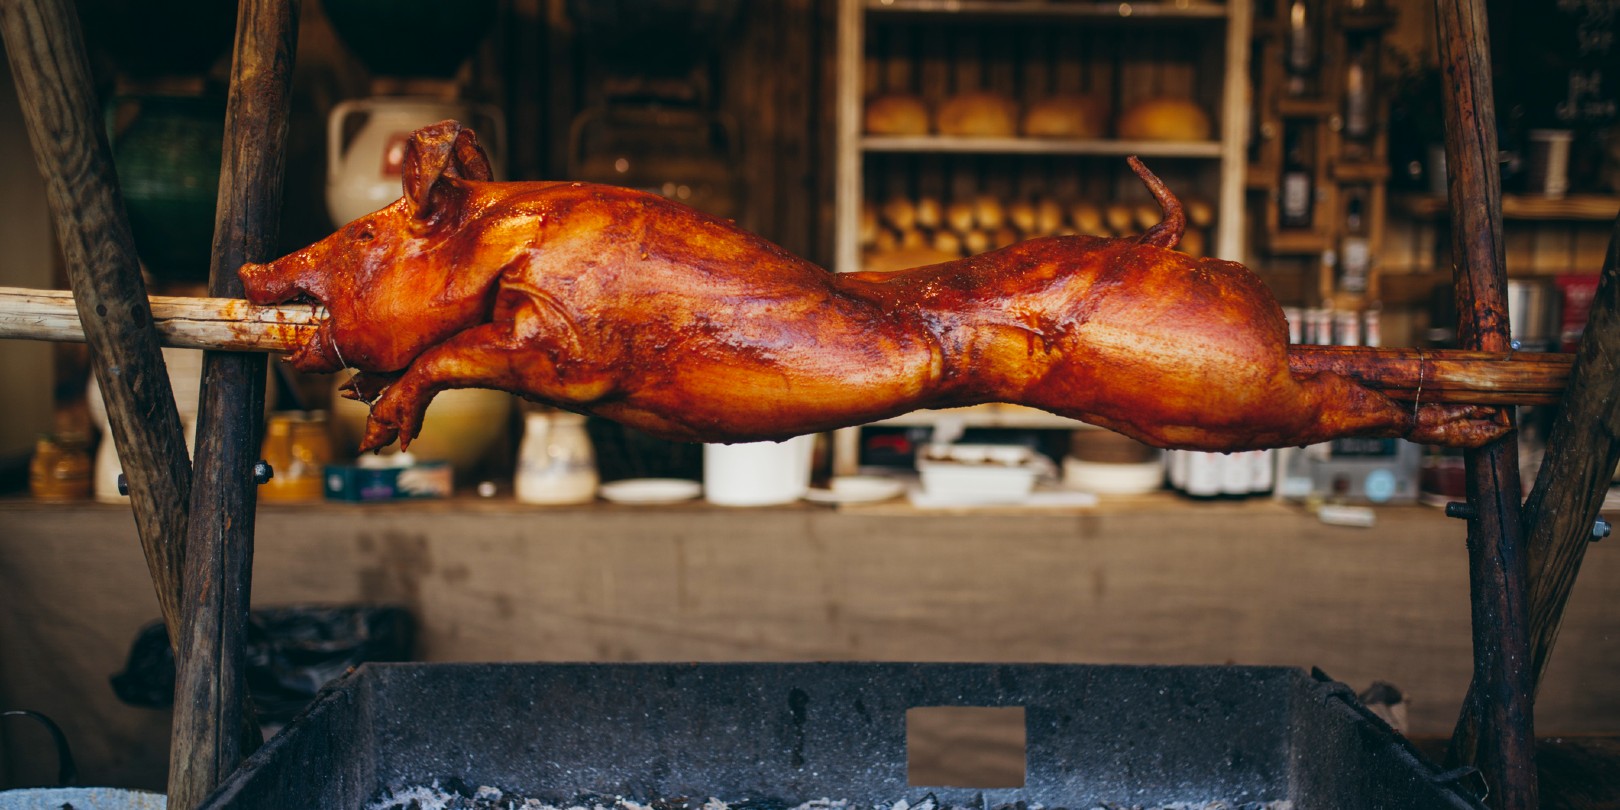 How To Host a Summer Pig Roast on a Budget - Cuisine at Home Guides